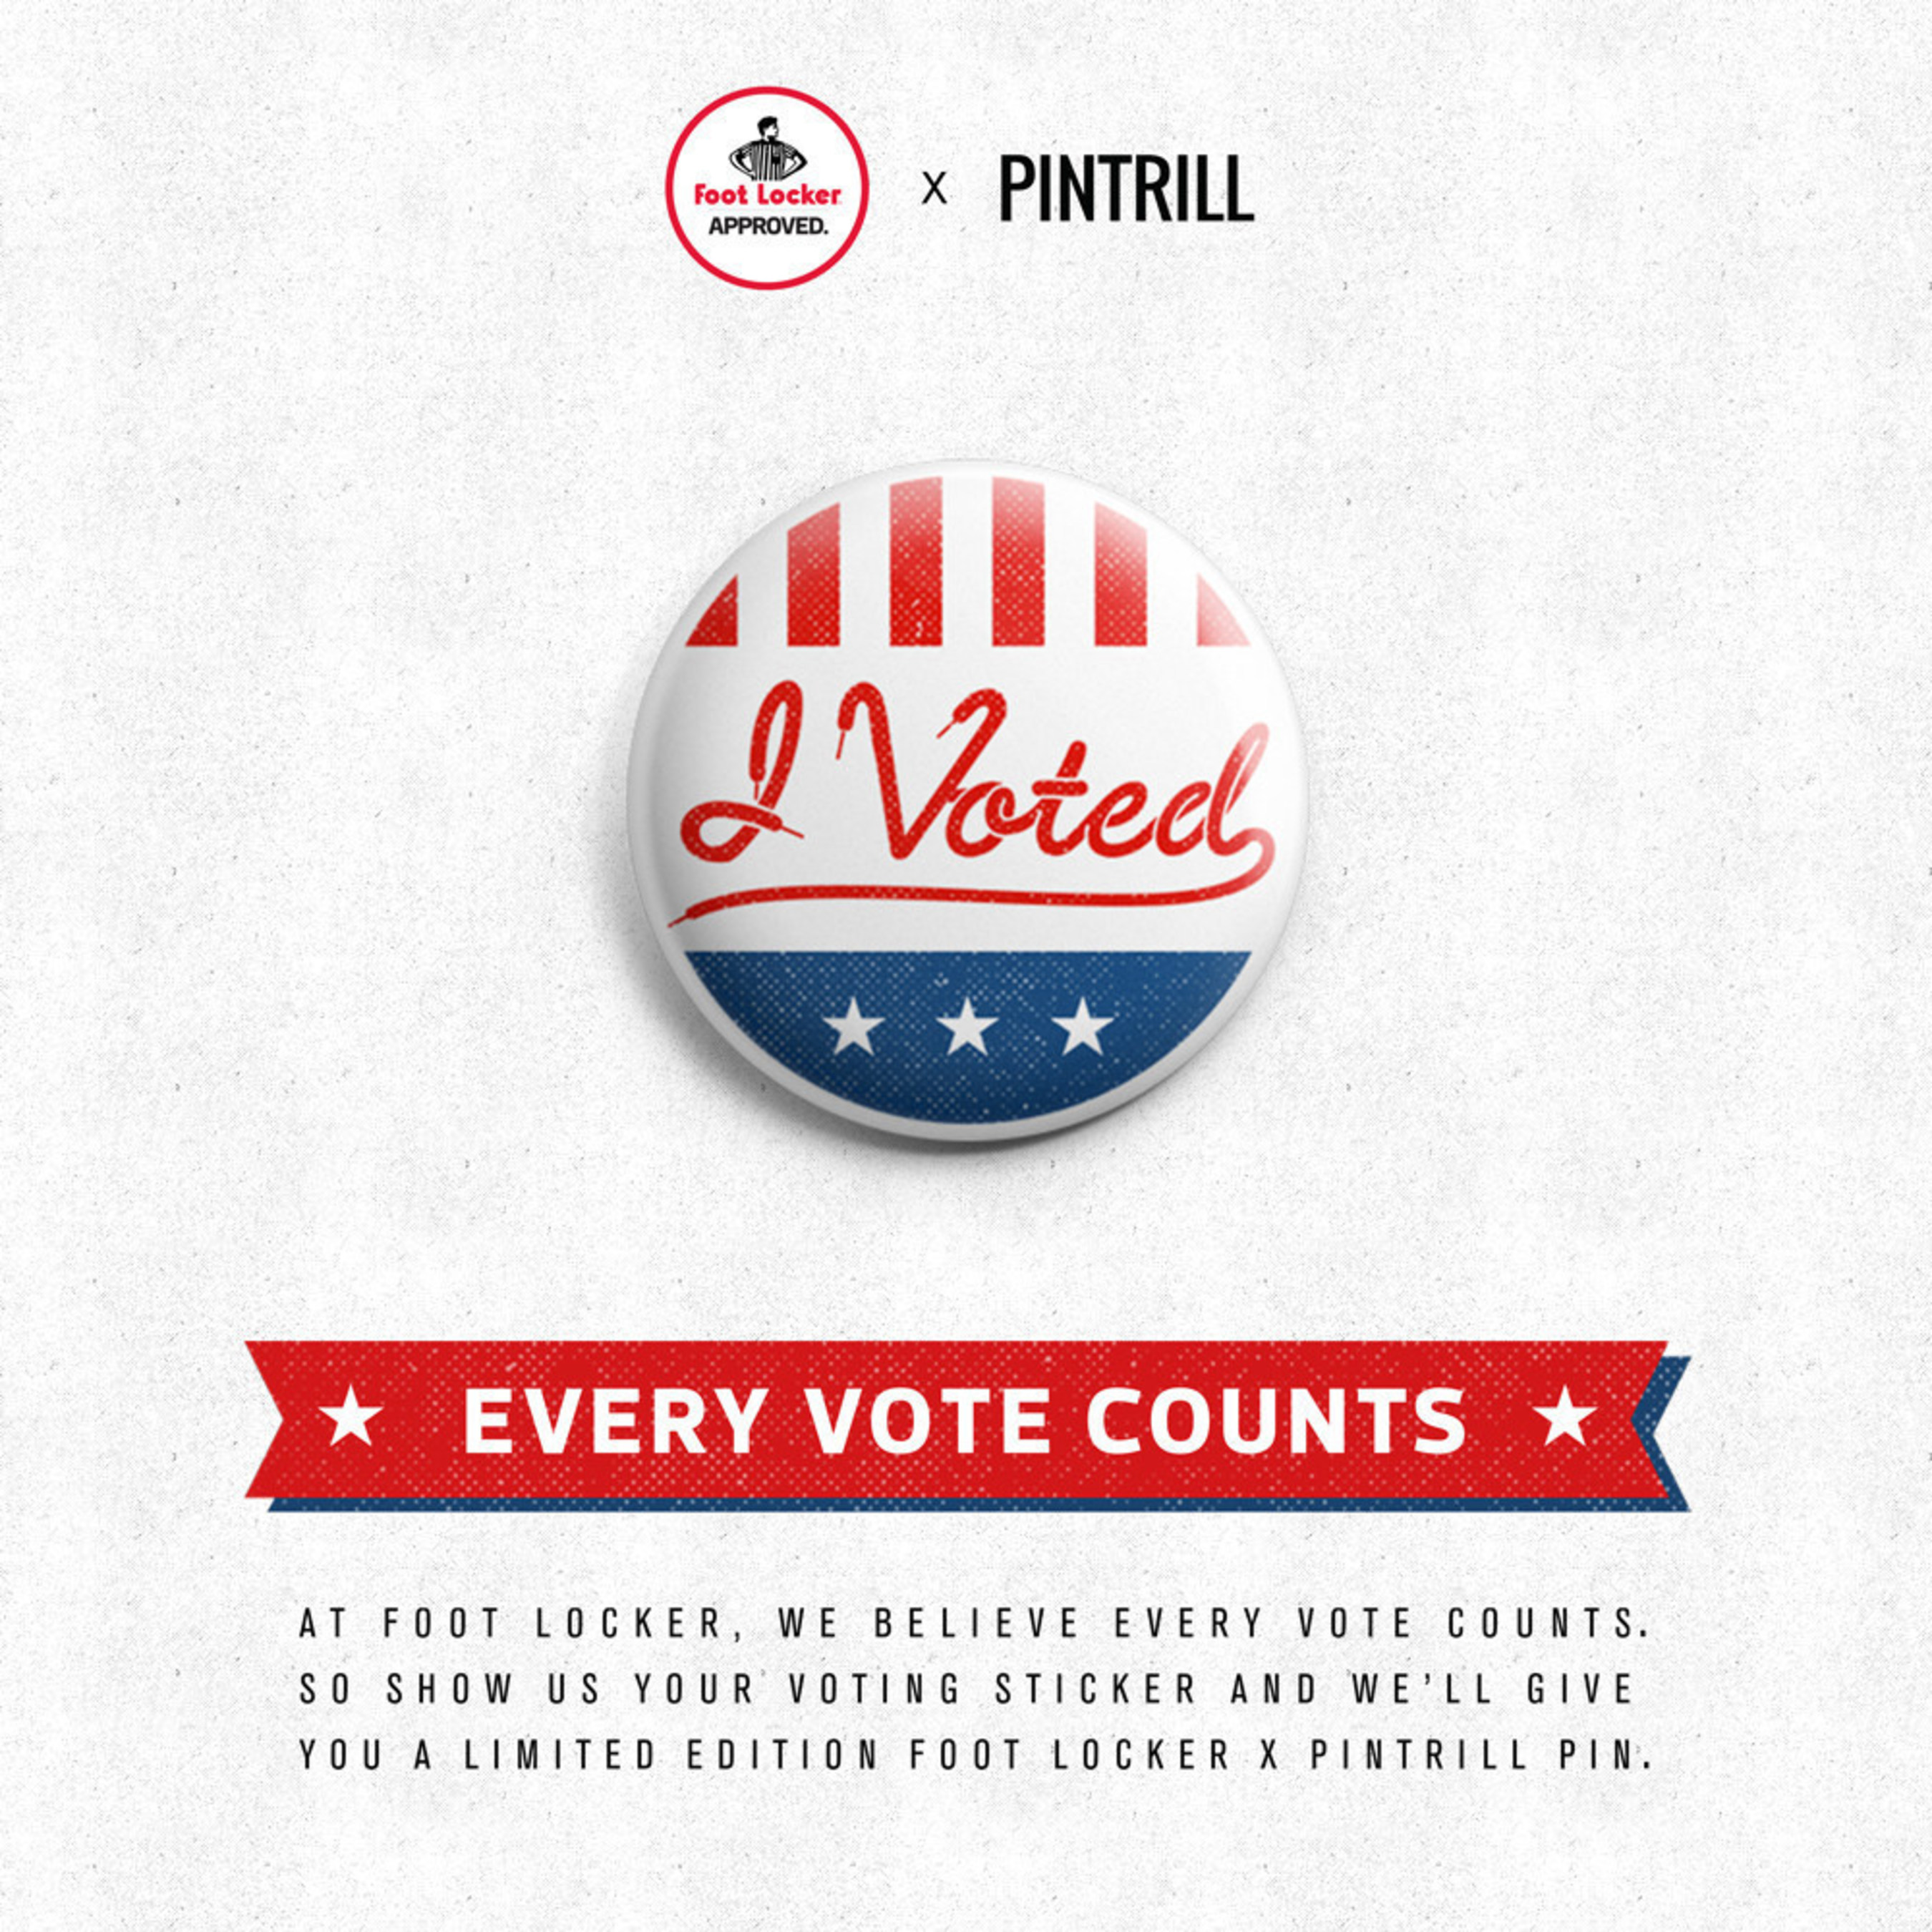 At Foot Locker, we believe every vote counts. So show us your voting sticker and we'll give you a limited-edition Foot Locker x PINTRILL pin on Election Day!